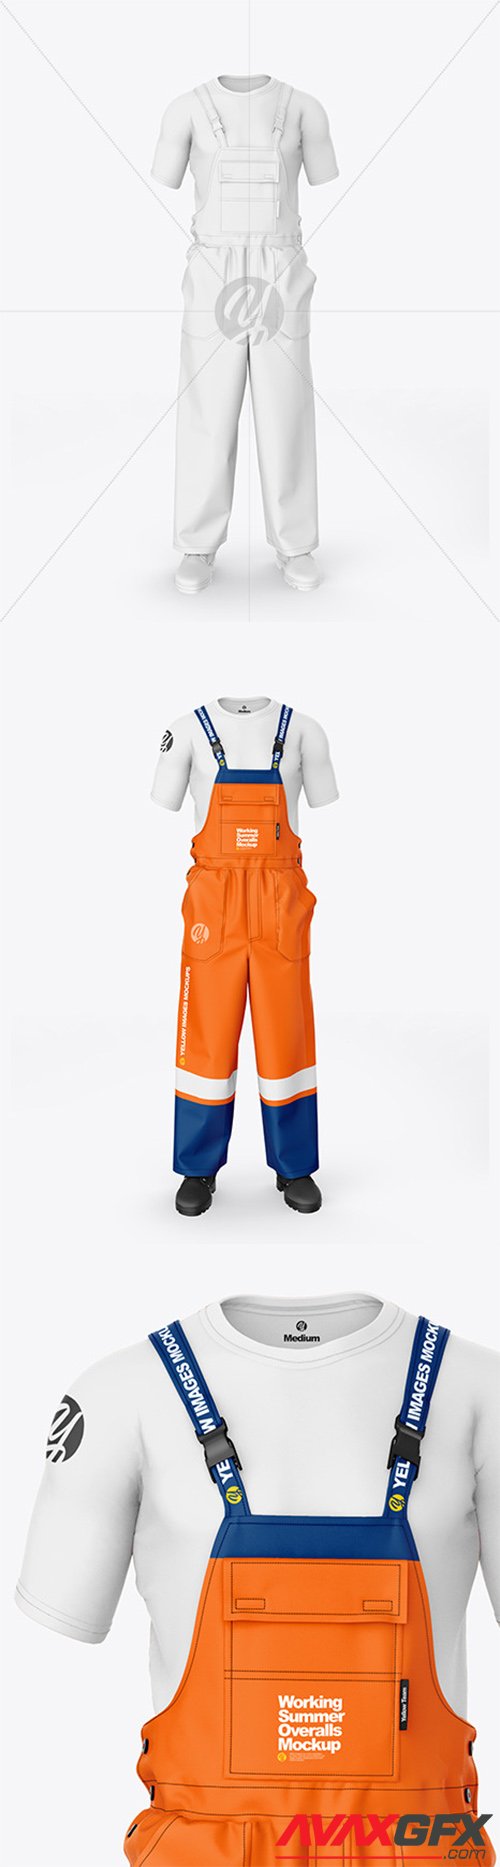 Working Summer Overalls Mockup – Front View 65539